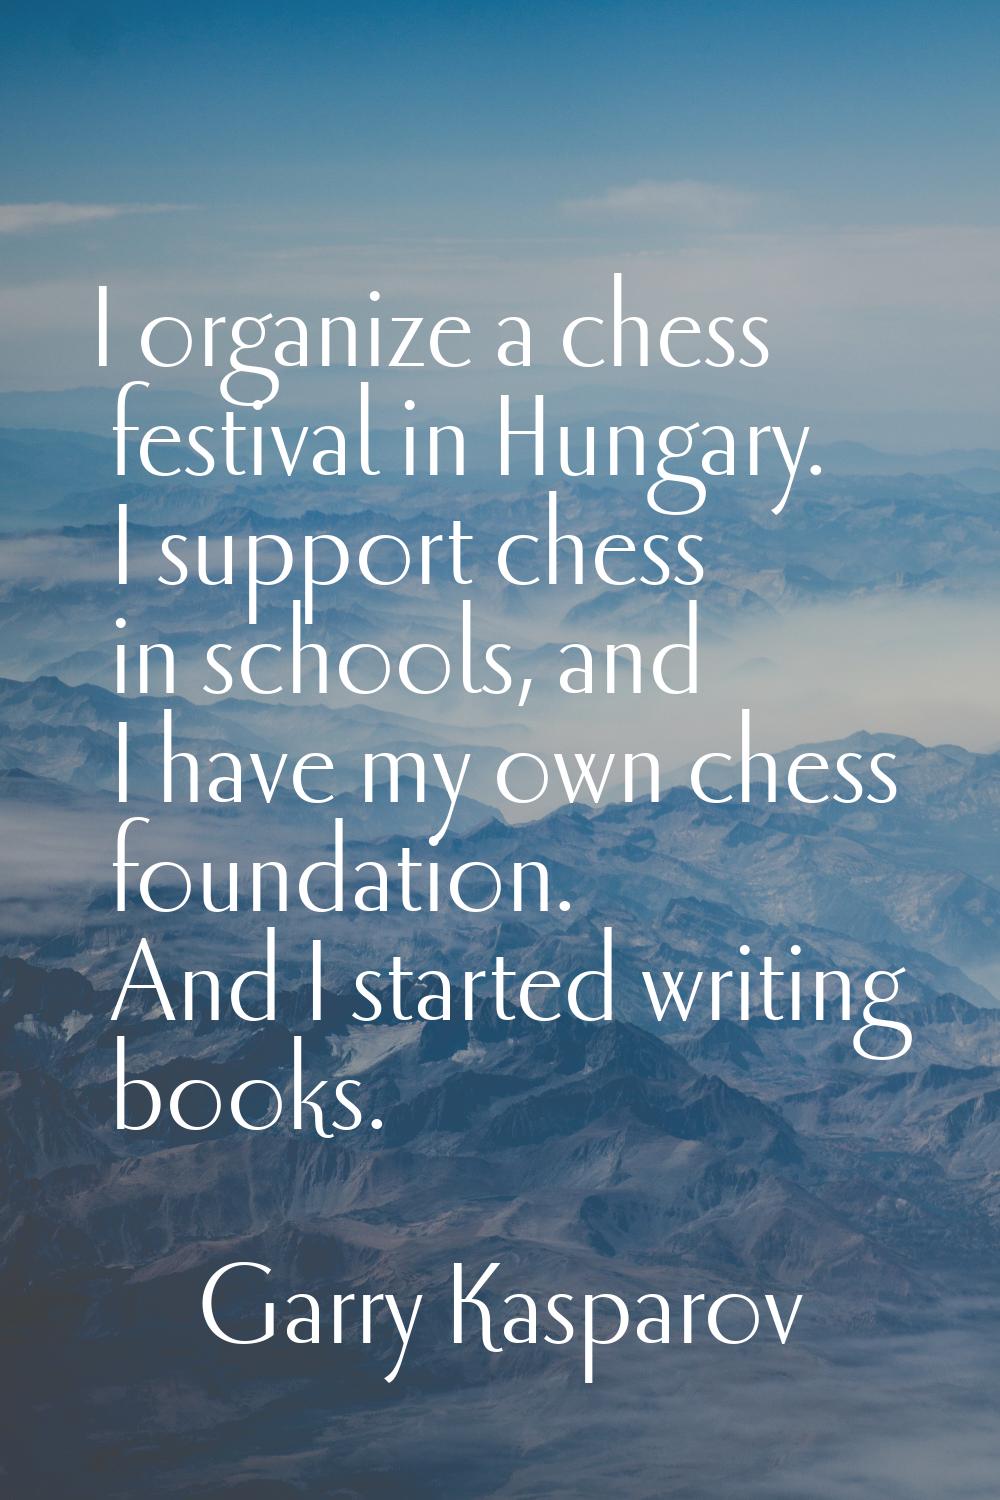 I organize a chess festival in Hungary. I support chess in schools, and I have my own chess foundat